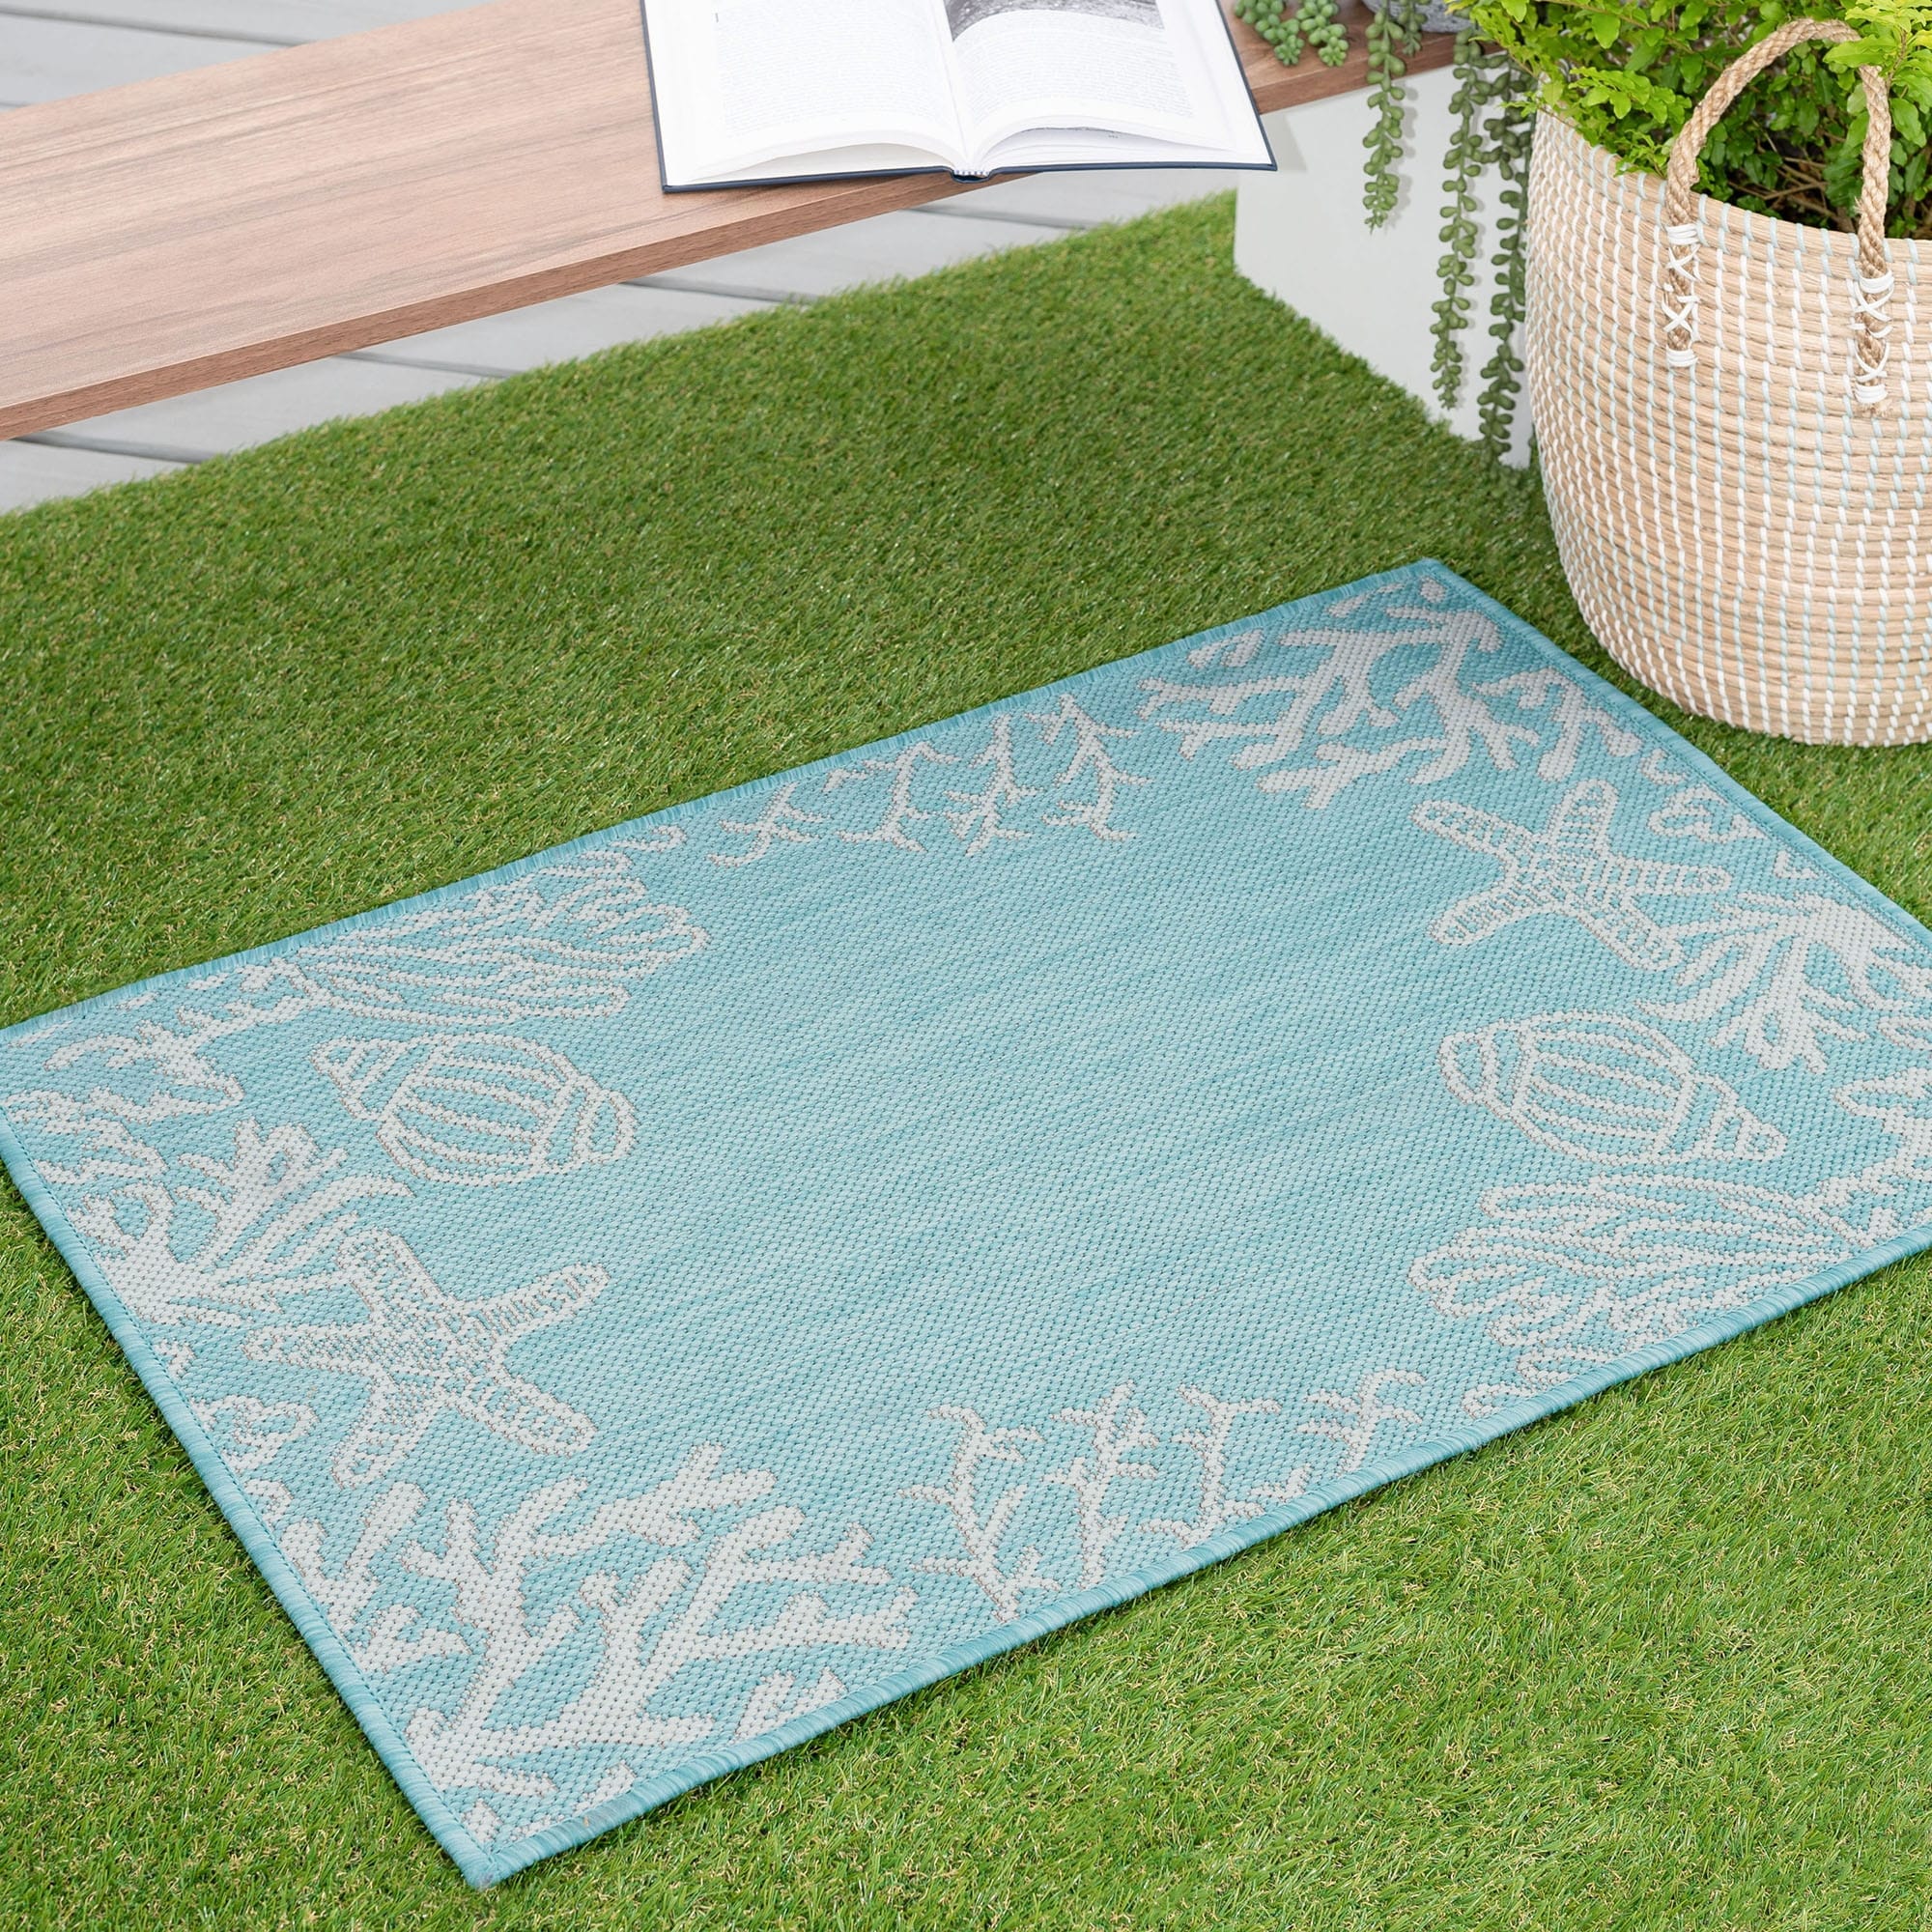 https://ak1.ostkcdn.com/images/products/is/images/direct/3ae80f28aad4df73a3efadaeb09ce7598f2b89f0/Alise-Rugs-Exo-Novelty-Coastal-Indoor-Outdoor-Area-Rug.jpg